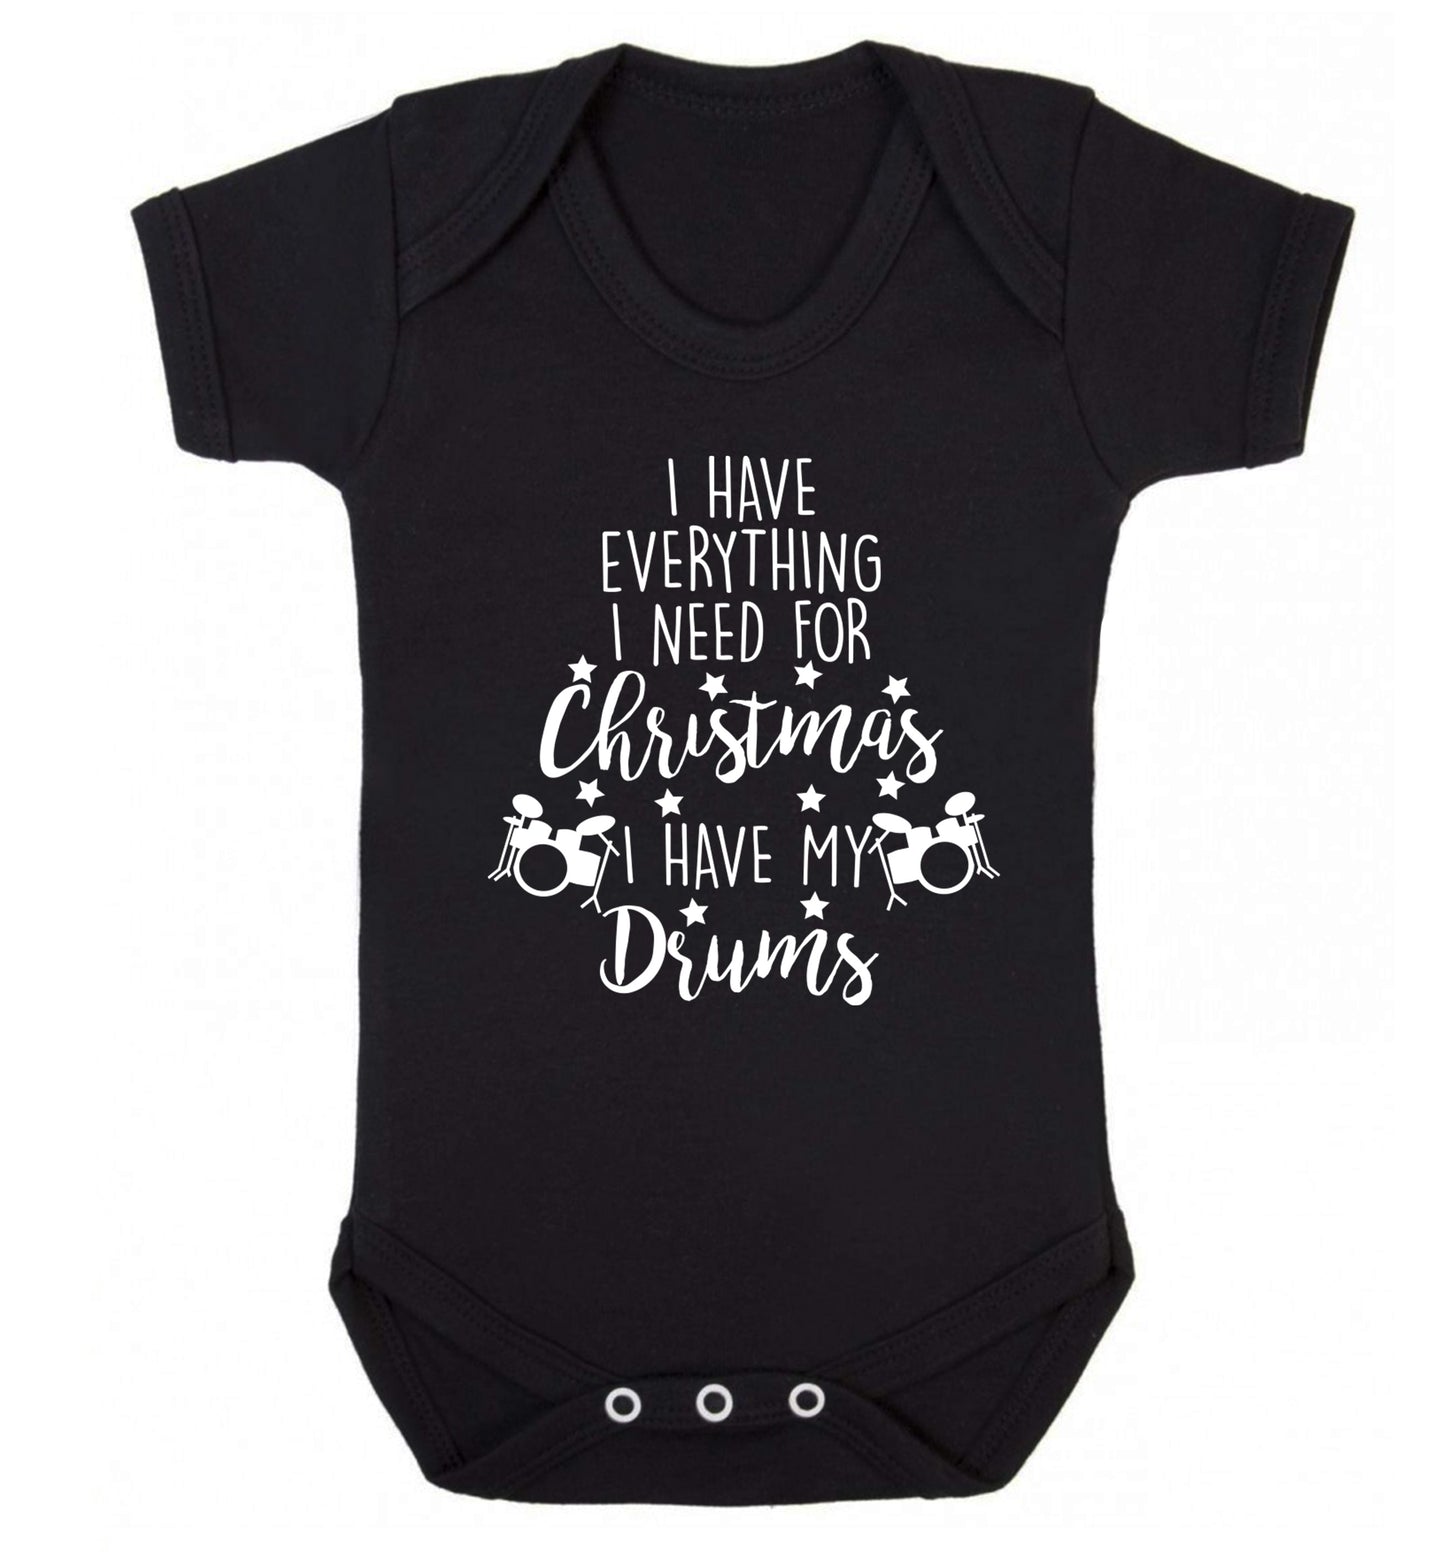 I have everything I need for Christmas I have my drums! Baby Vest black 18-24 months